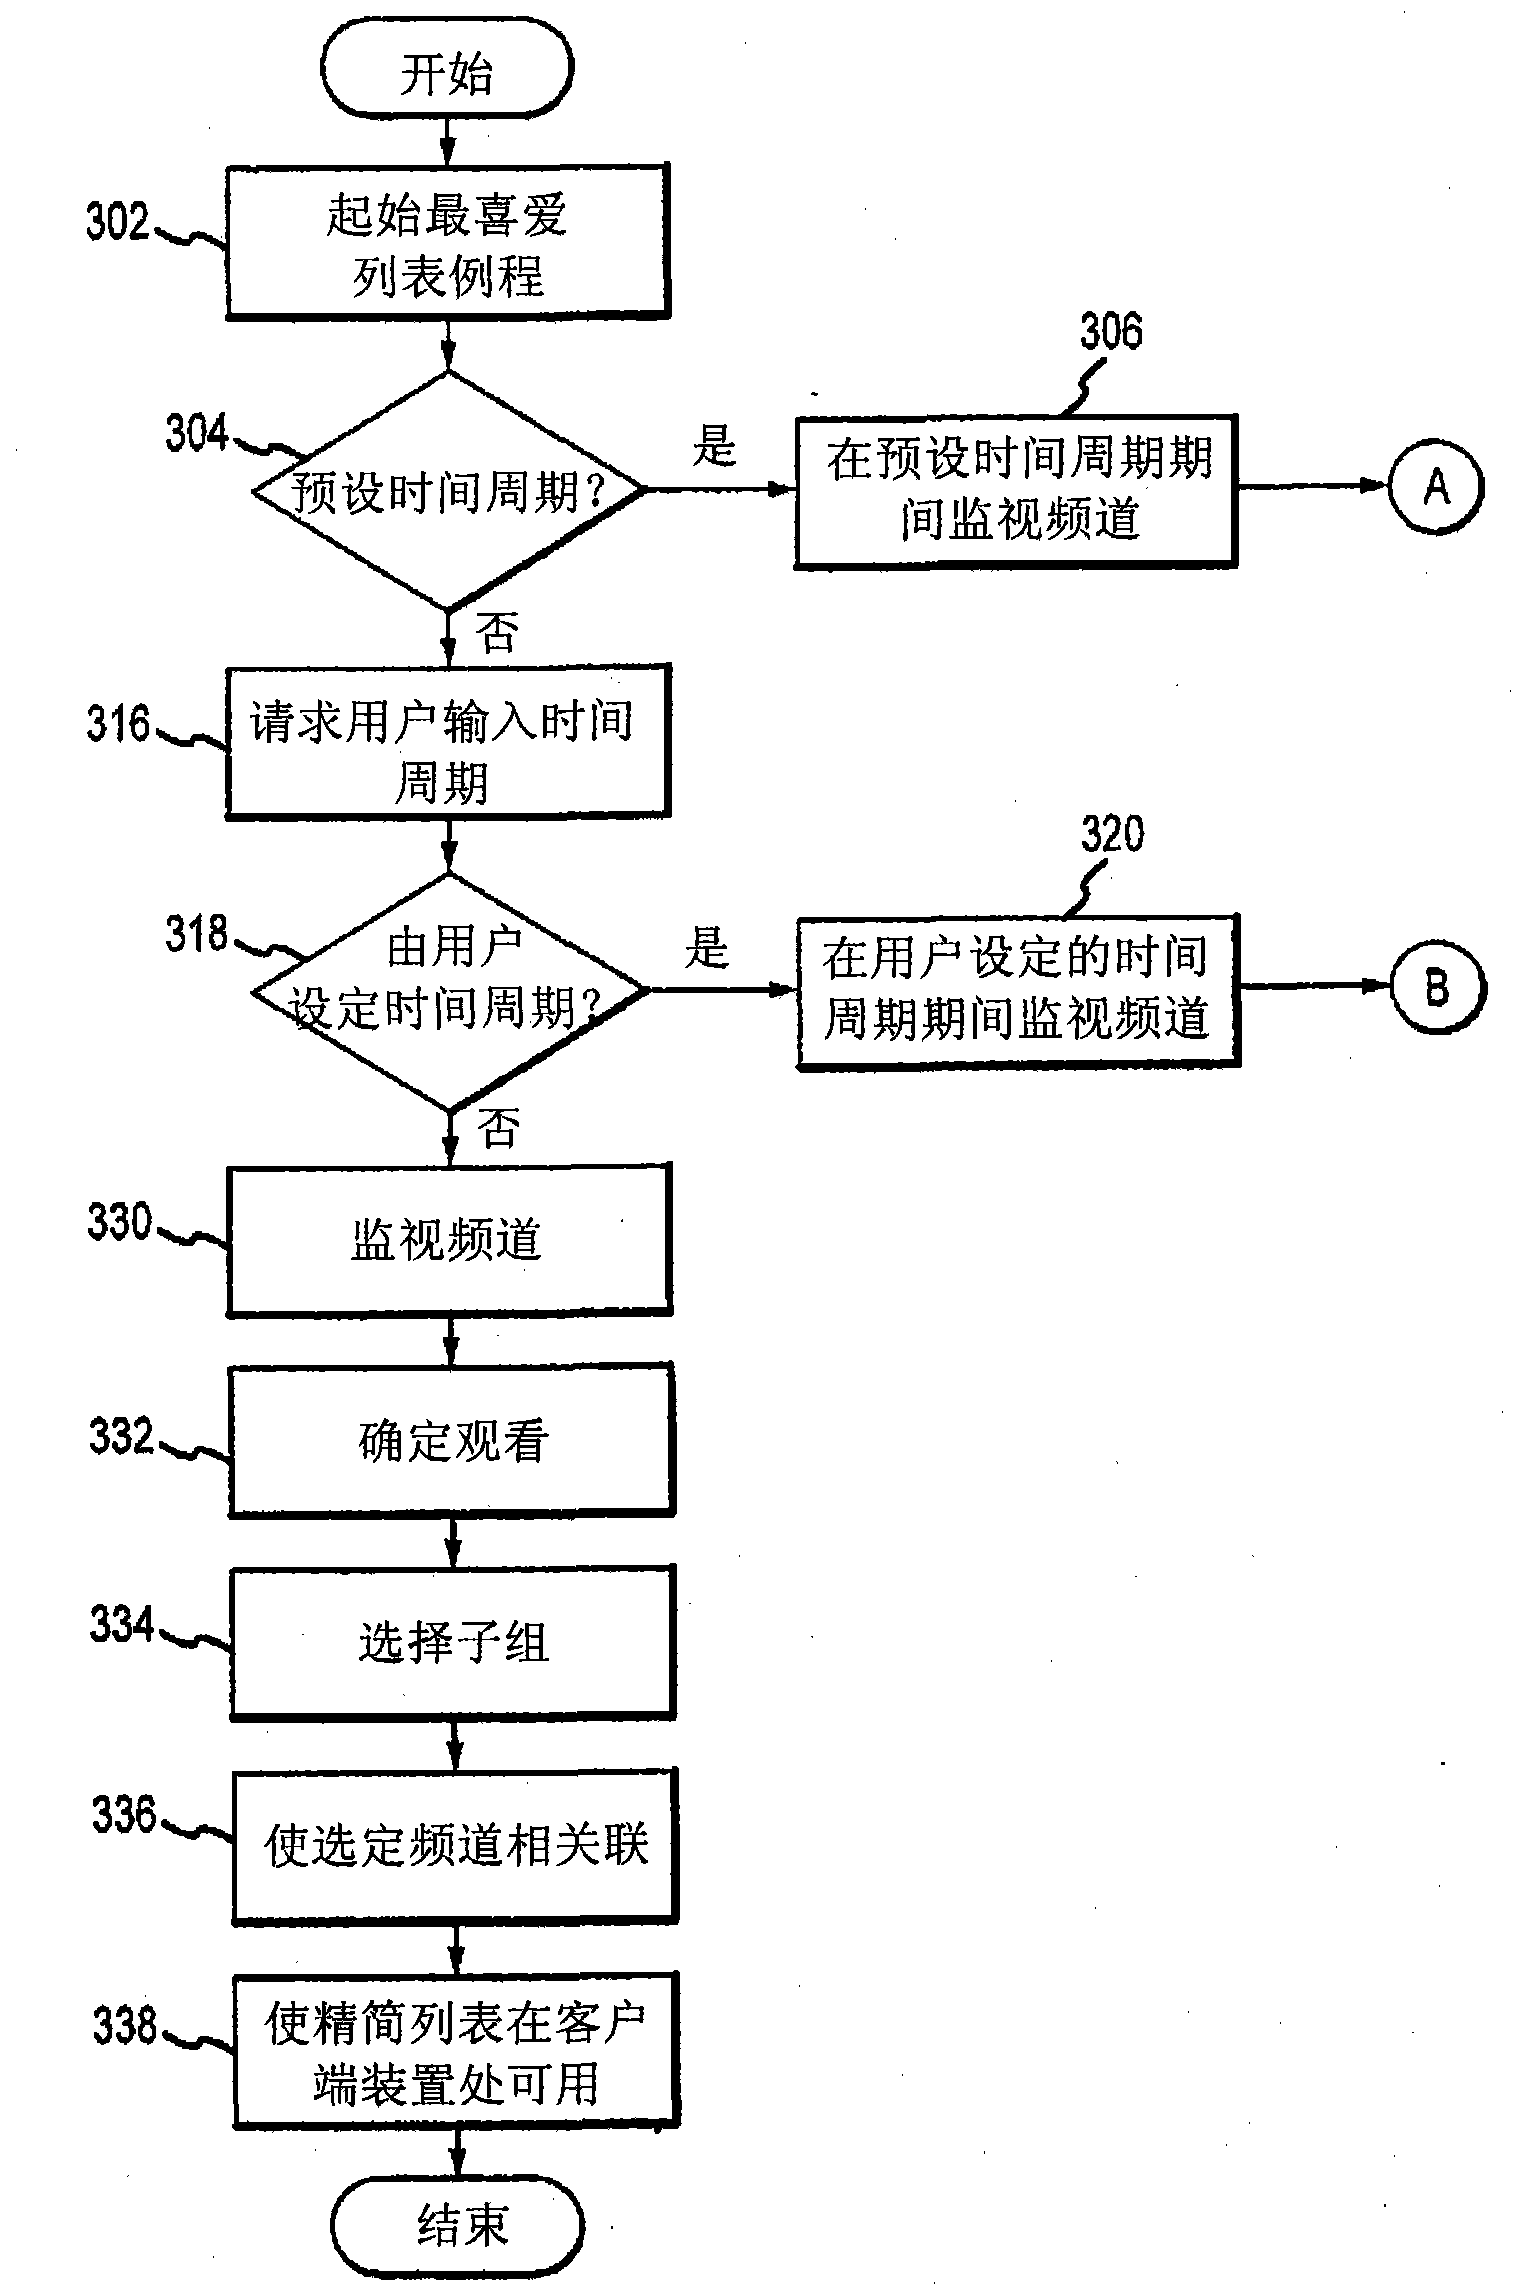 Systems and methods for generating and/or presenting a condensed list of channels